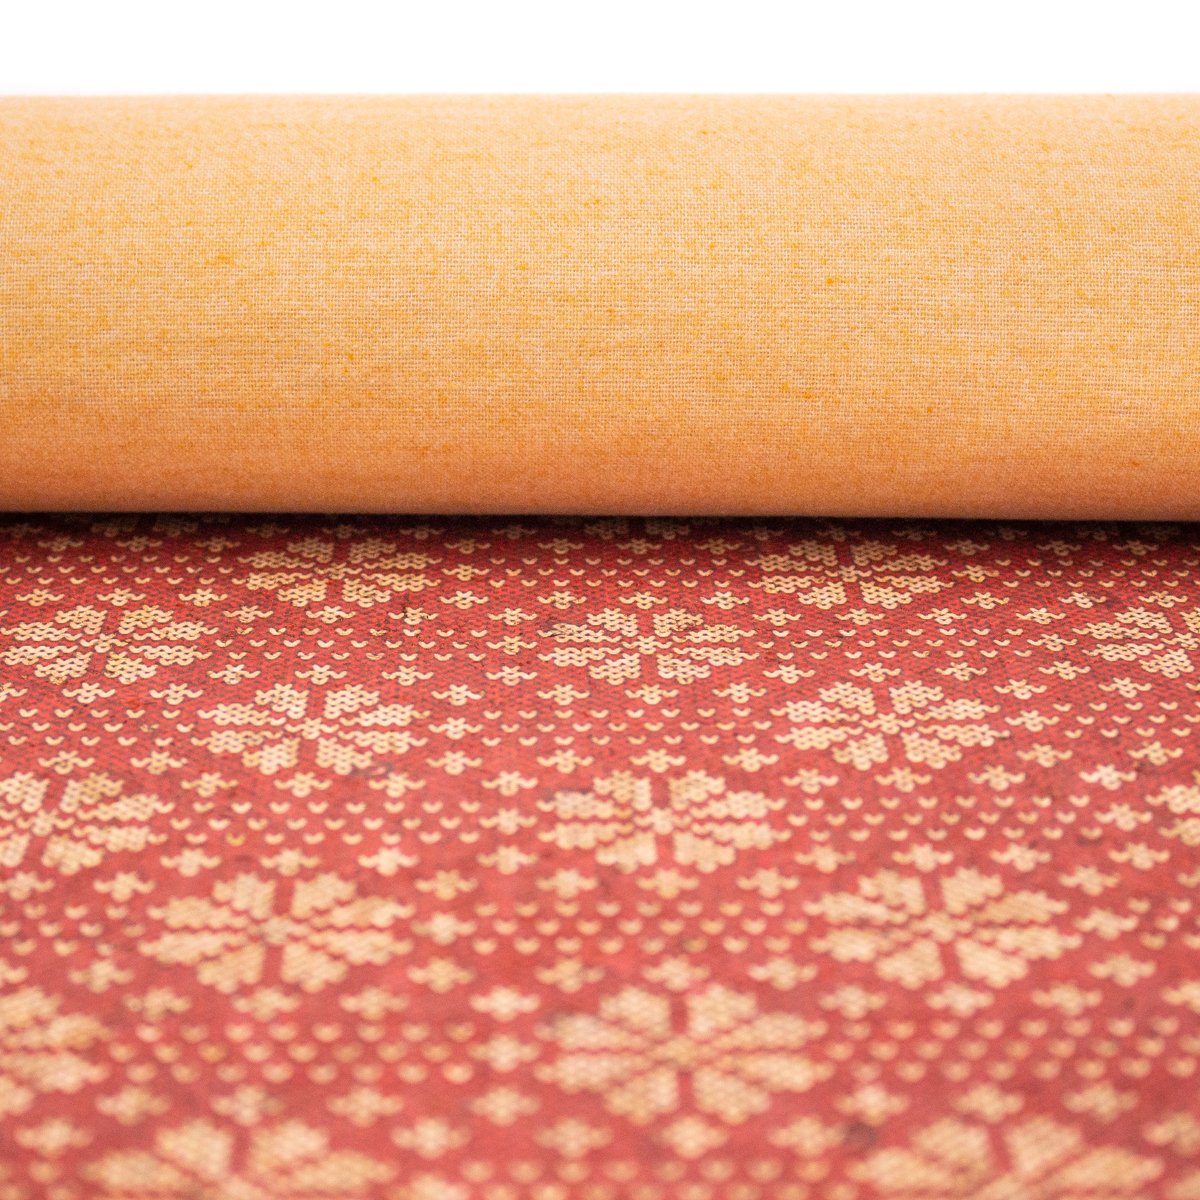 Natural Cork Christmas Red Snowflake Pattern Fabric Collection COF-328